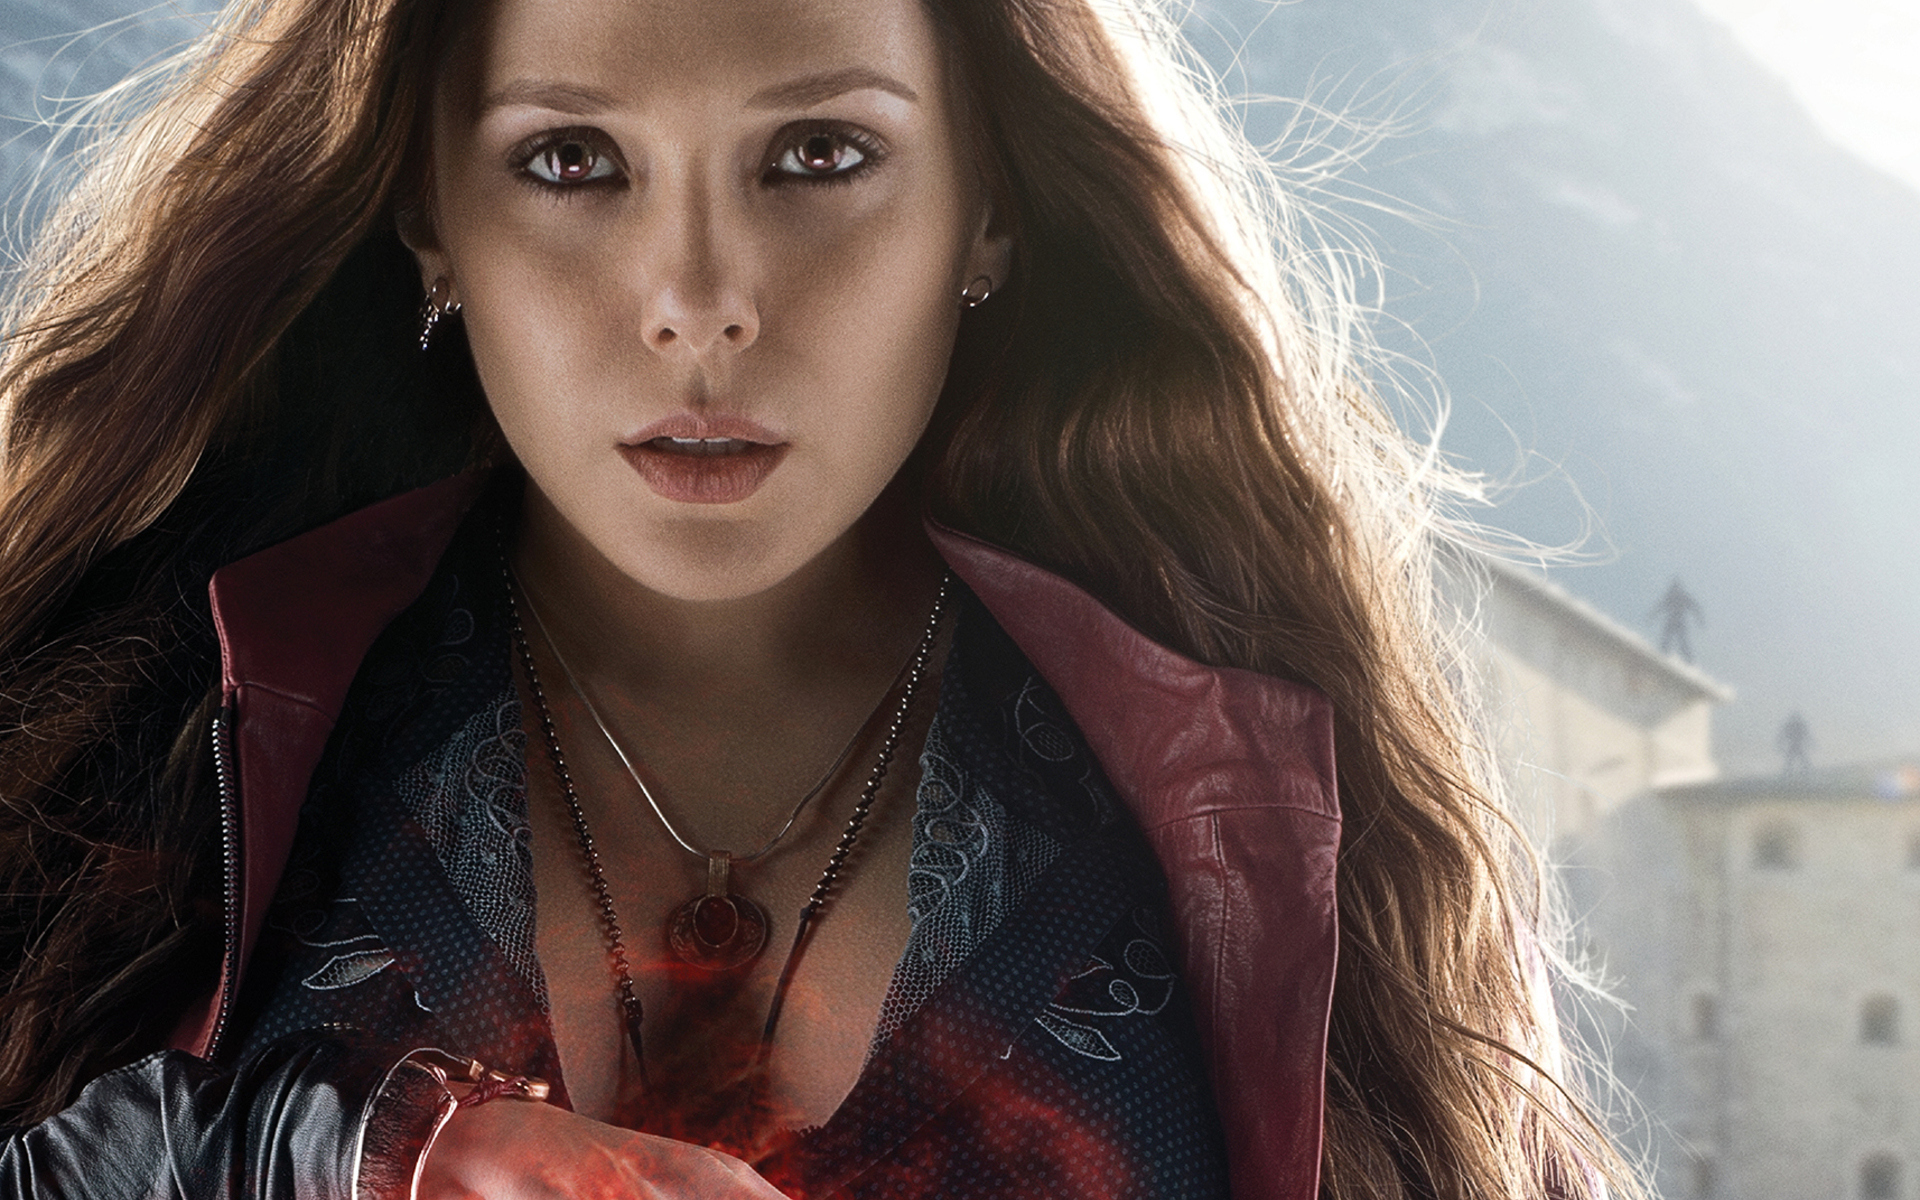 avengers, earrings, magic, scarlet witch, elizabeth olsen, long hair, movie, avengers: age of ultron, necklace, red eyes, redhead, the avengers